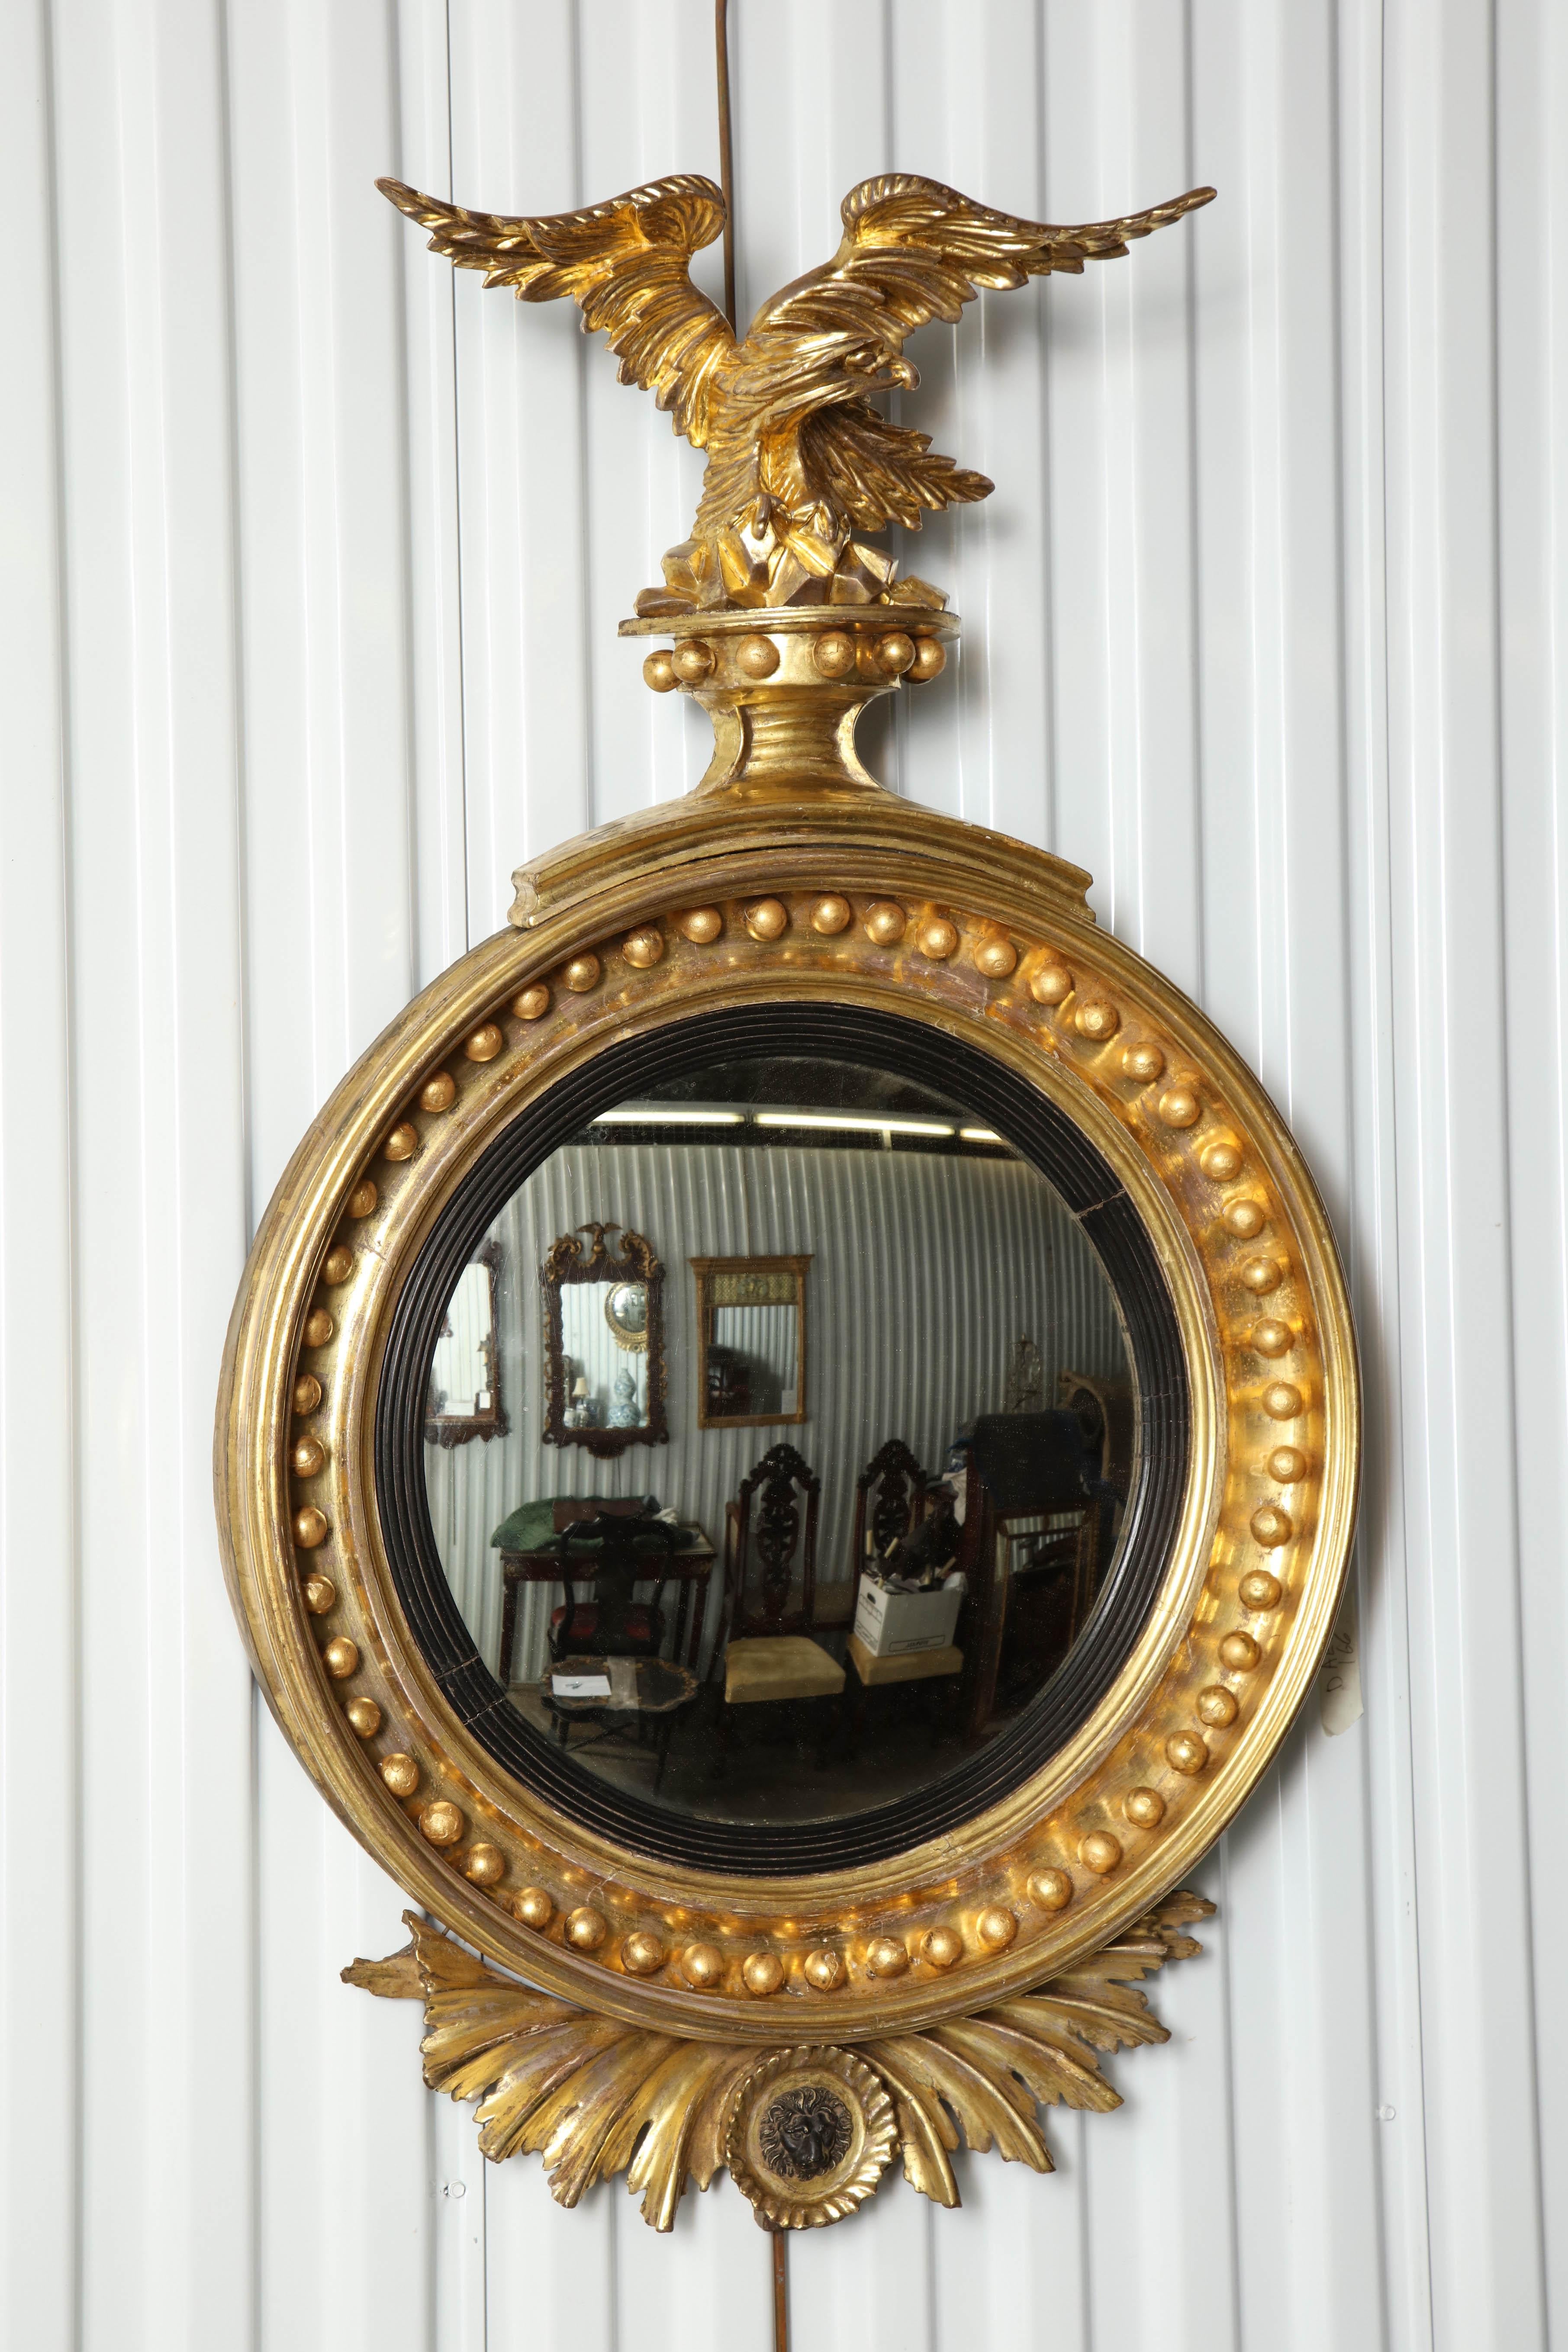 Giltwood convex mirror with eagle surmounts, reeded inner frame and numerous spheres.